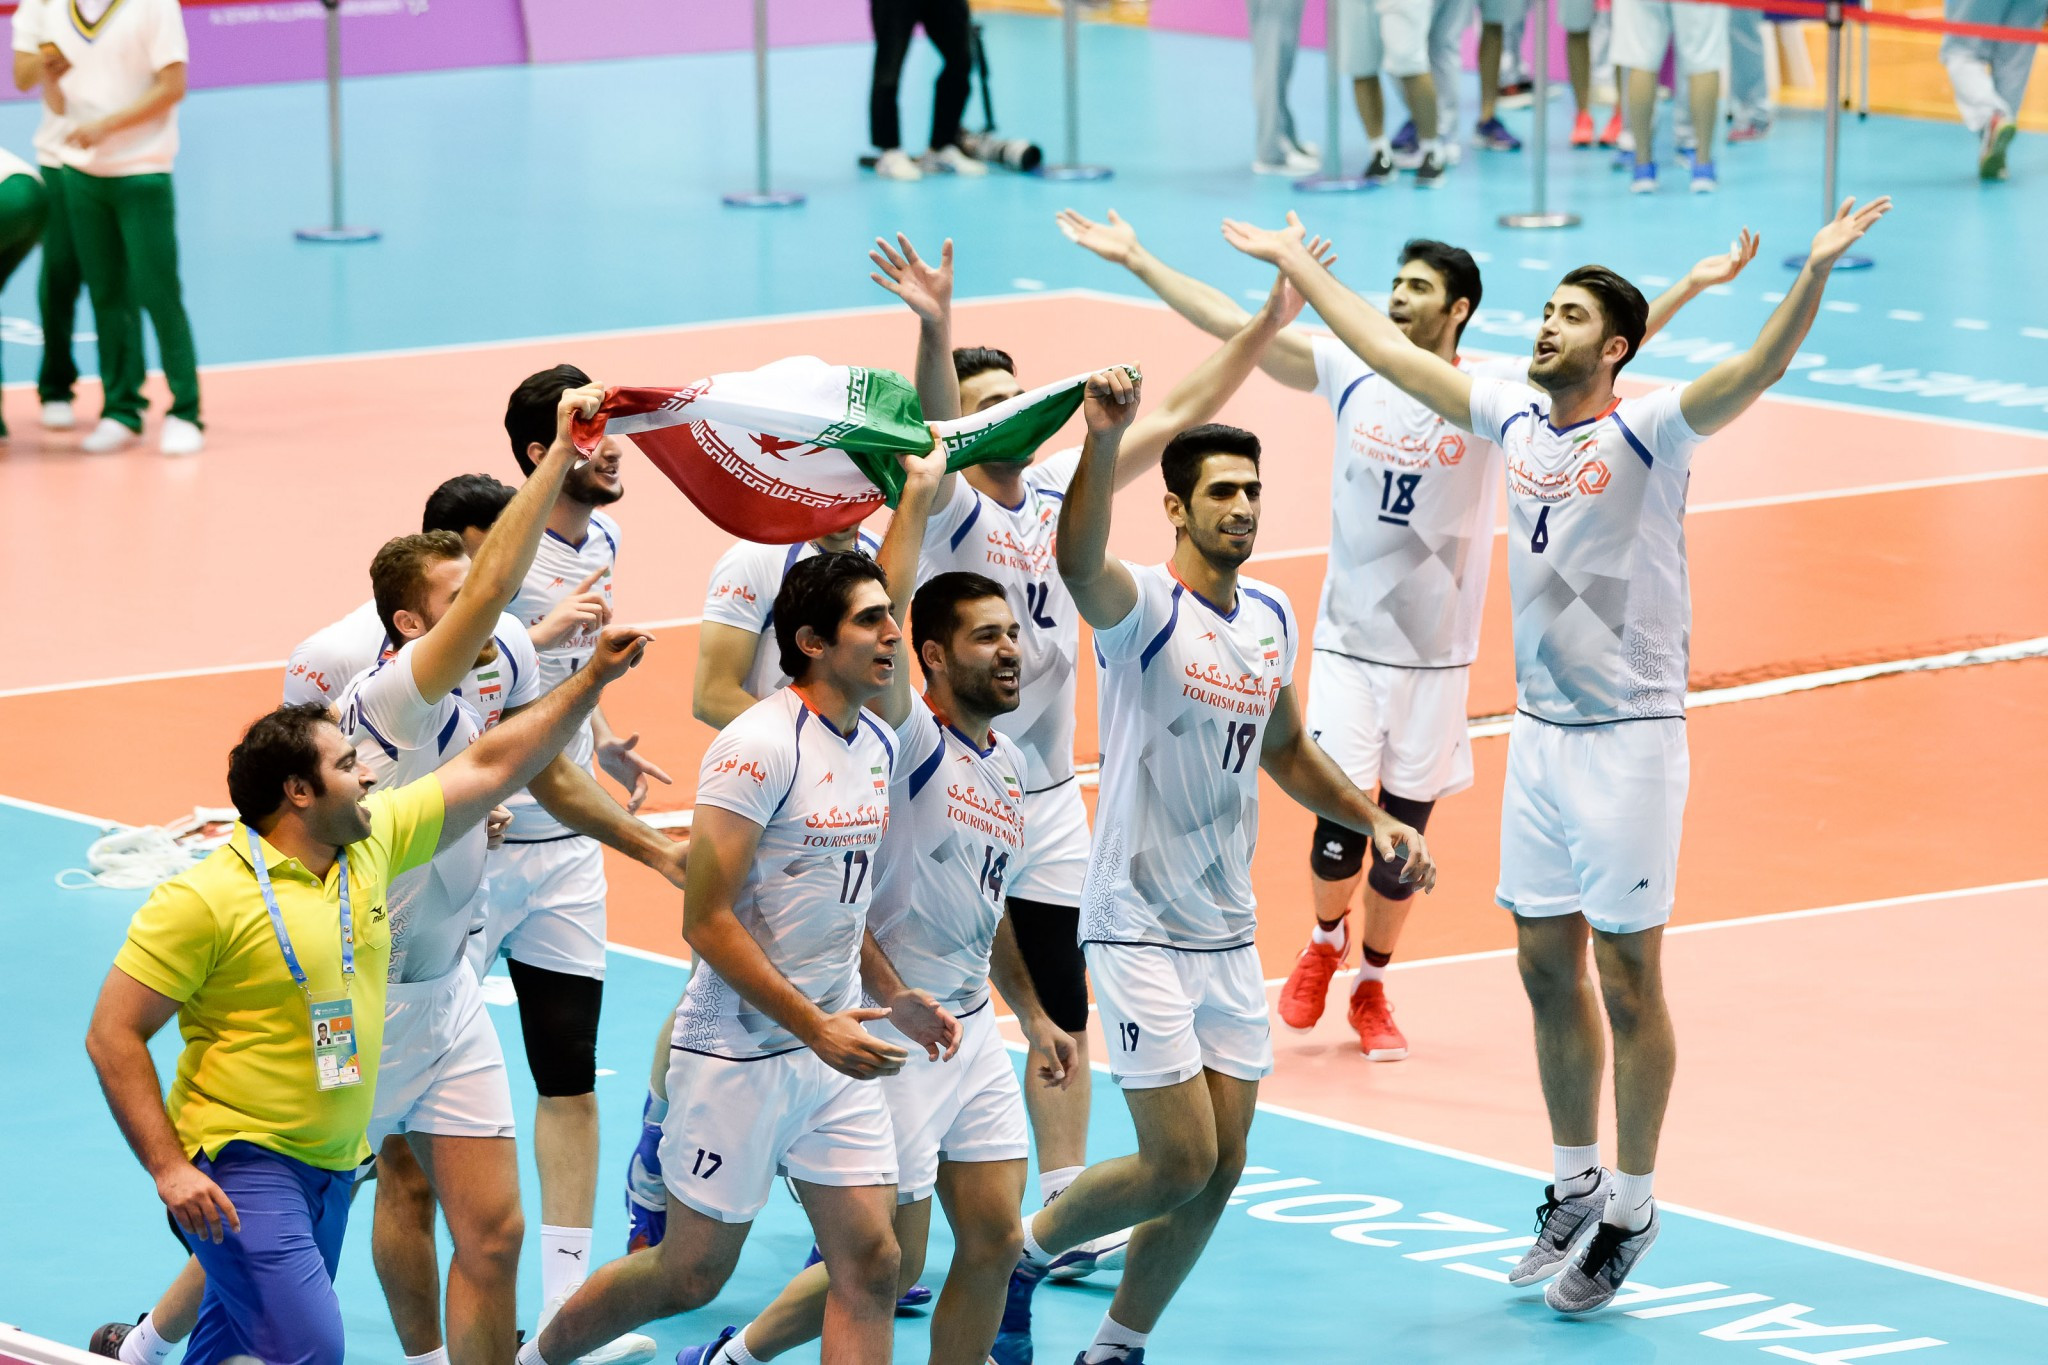 Iran beat Russia in five sets in the final of the men’s volleyball event ©Taipei 2017